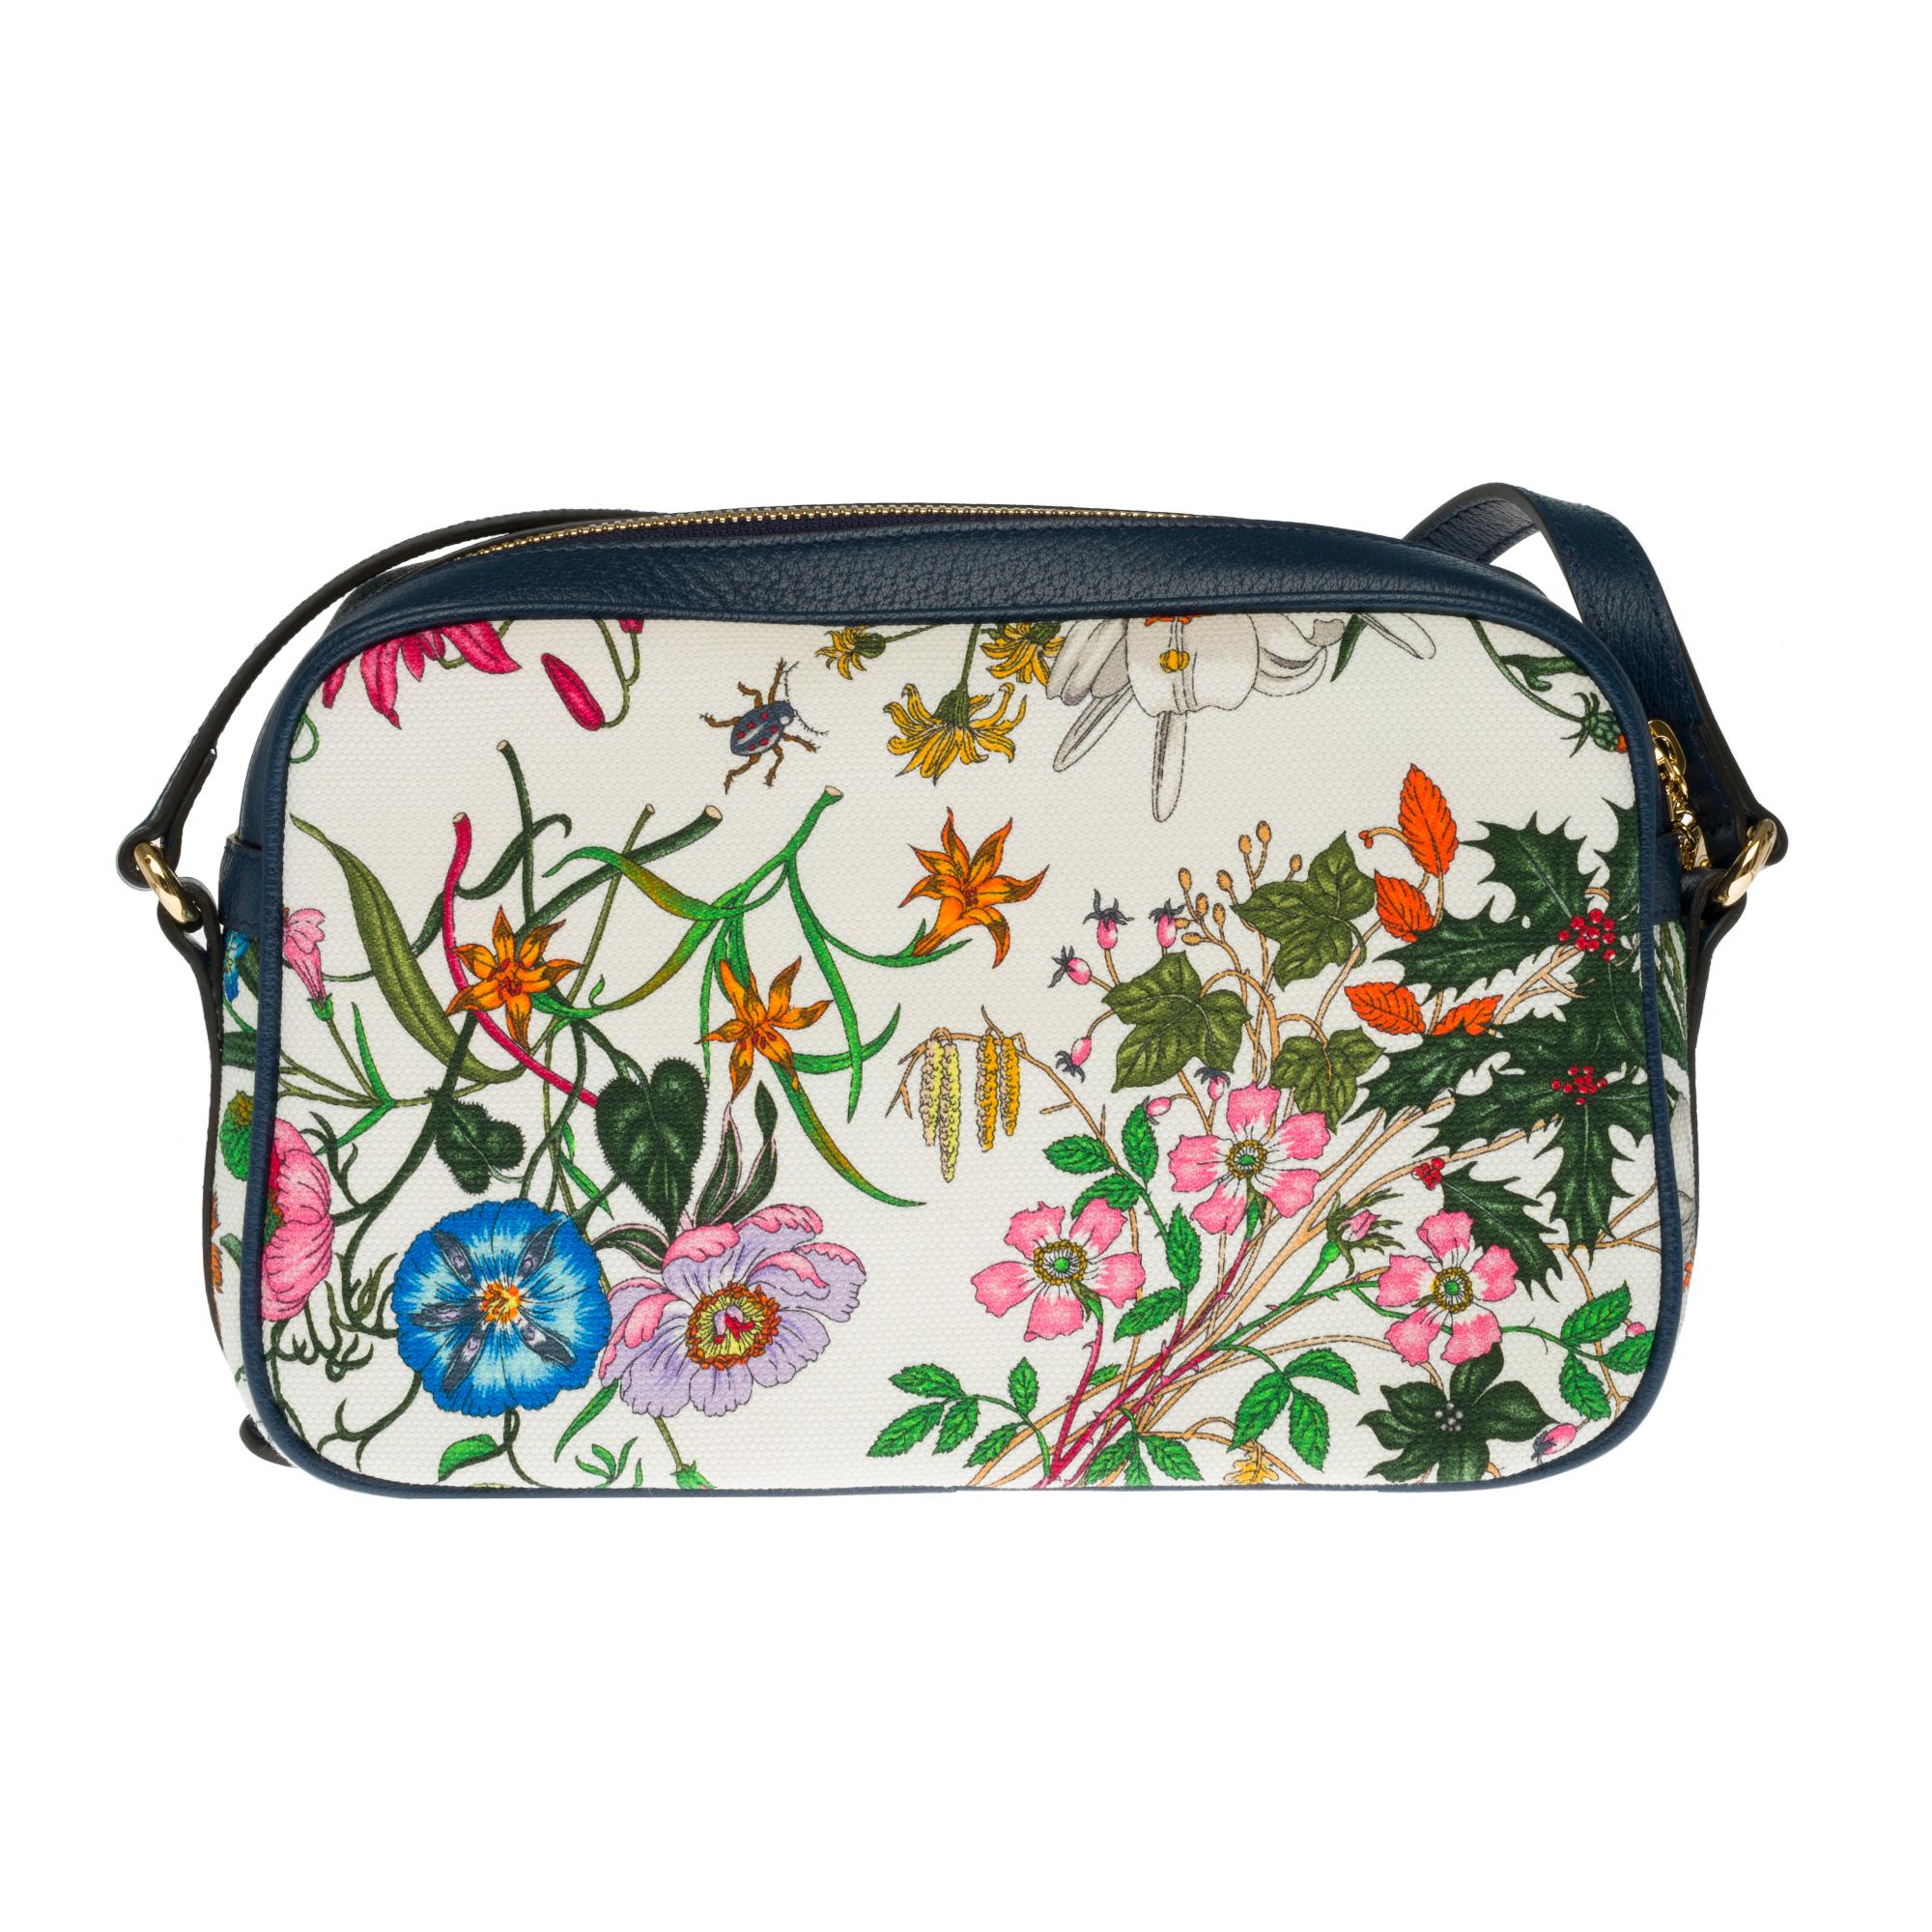 
GUCCI
Canvas Flora Floral Shoulder Bag White Blue Agata Mulitcolor
This stylish crossbody is crafted of ivory canvas with printed multicolor florals and navy blue leather trim. The bag features an external flap pocket and an adjustable shoulder